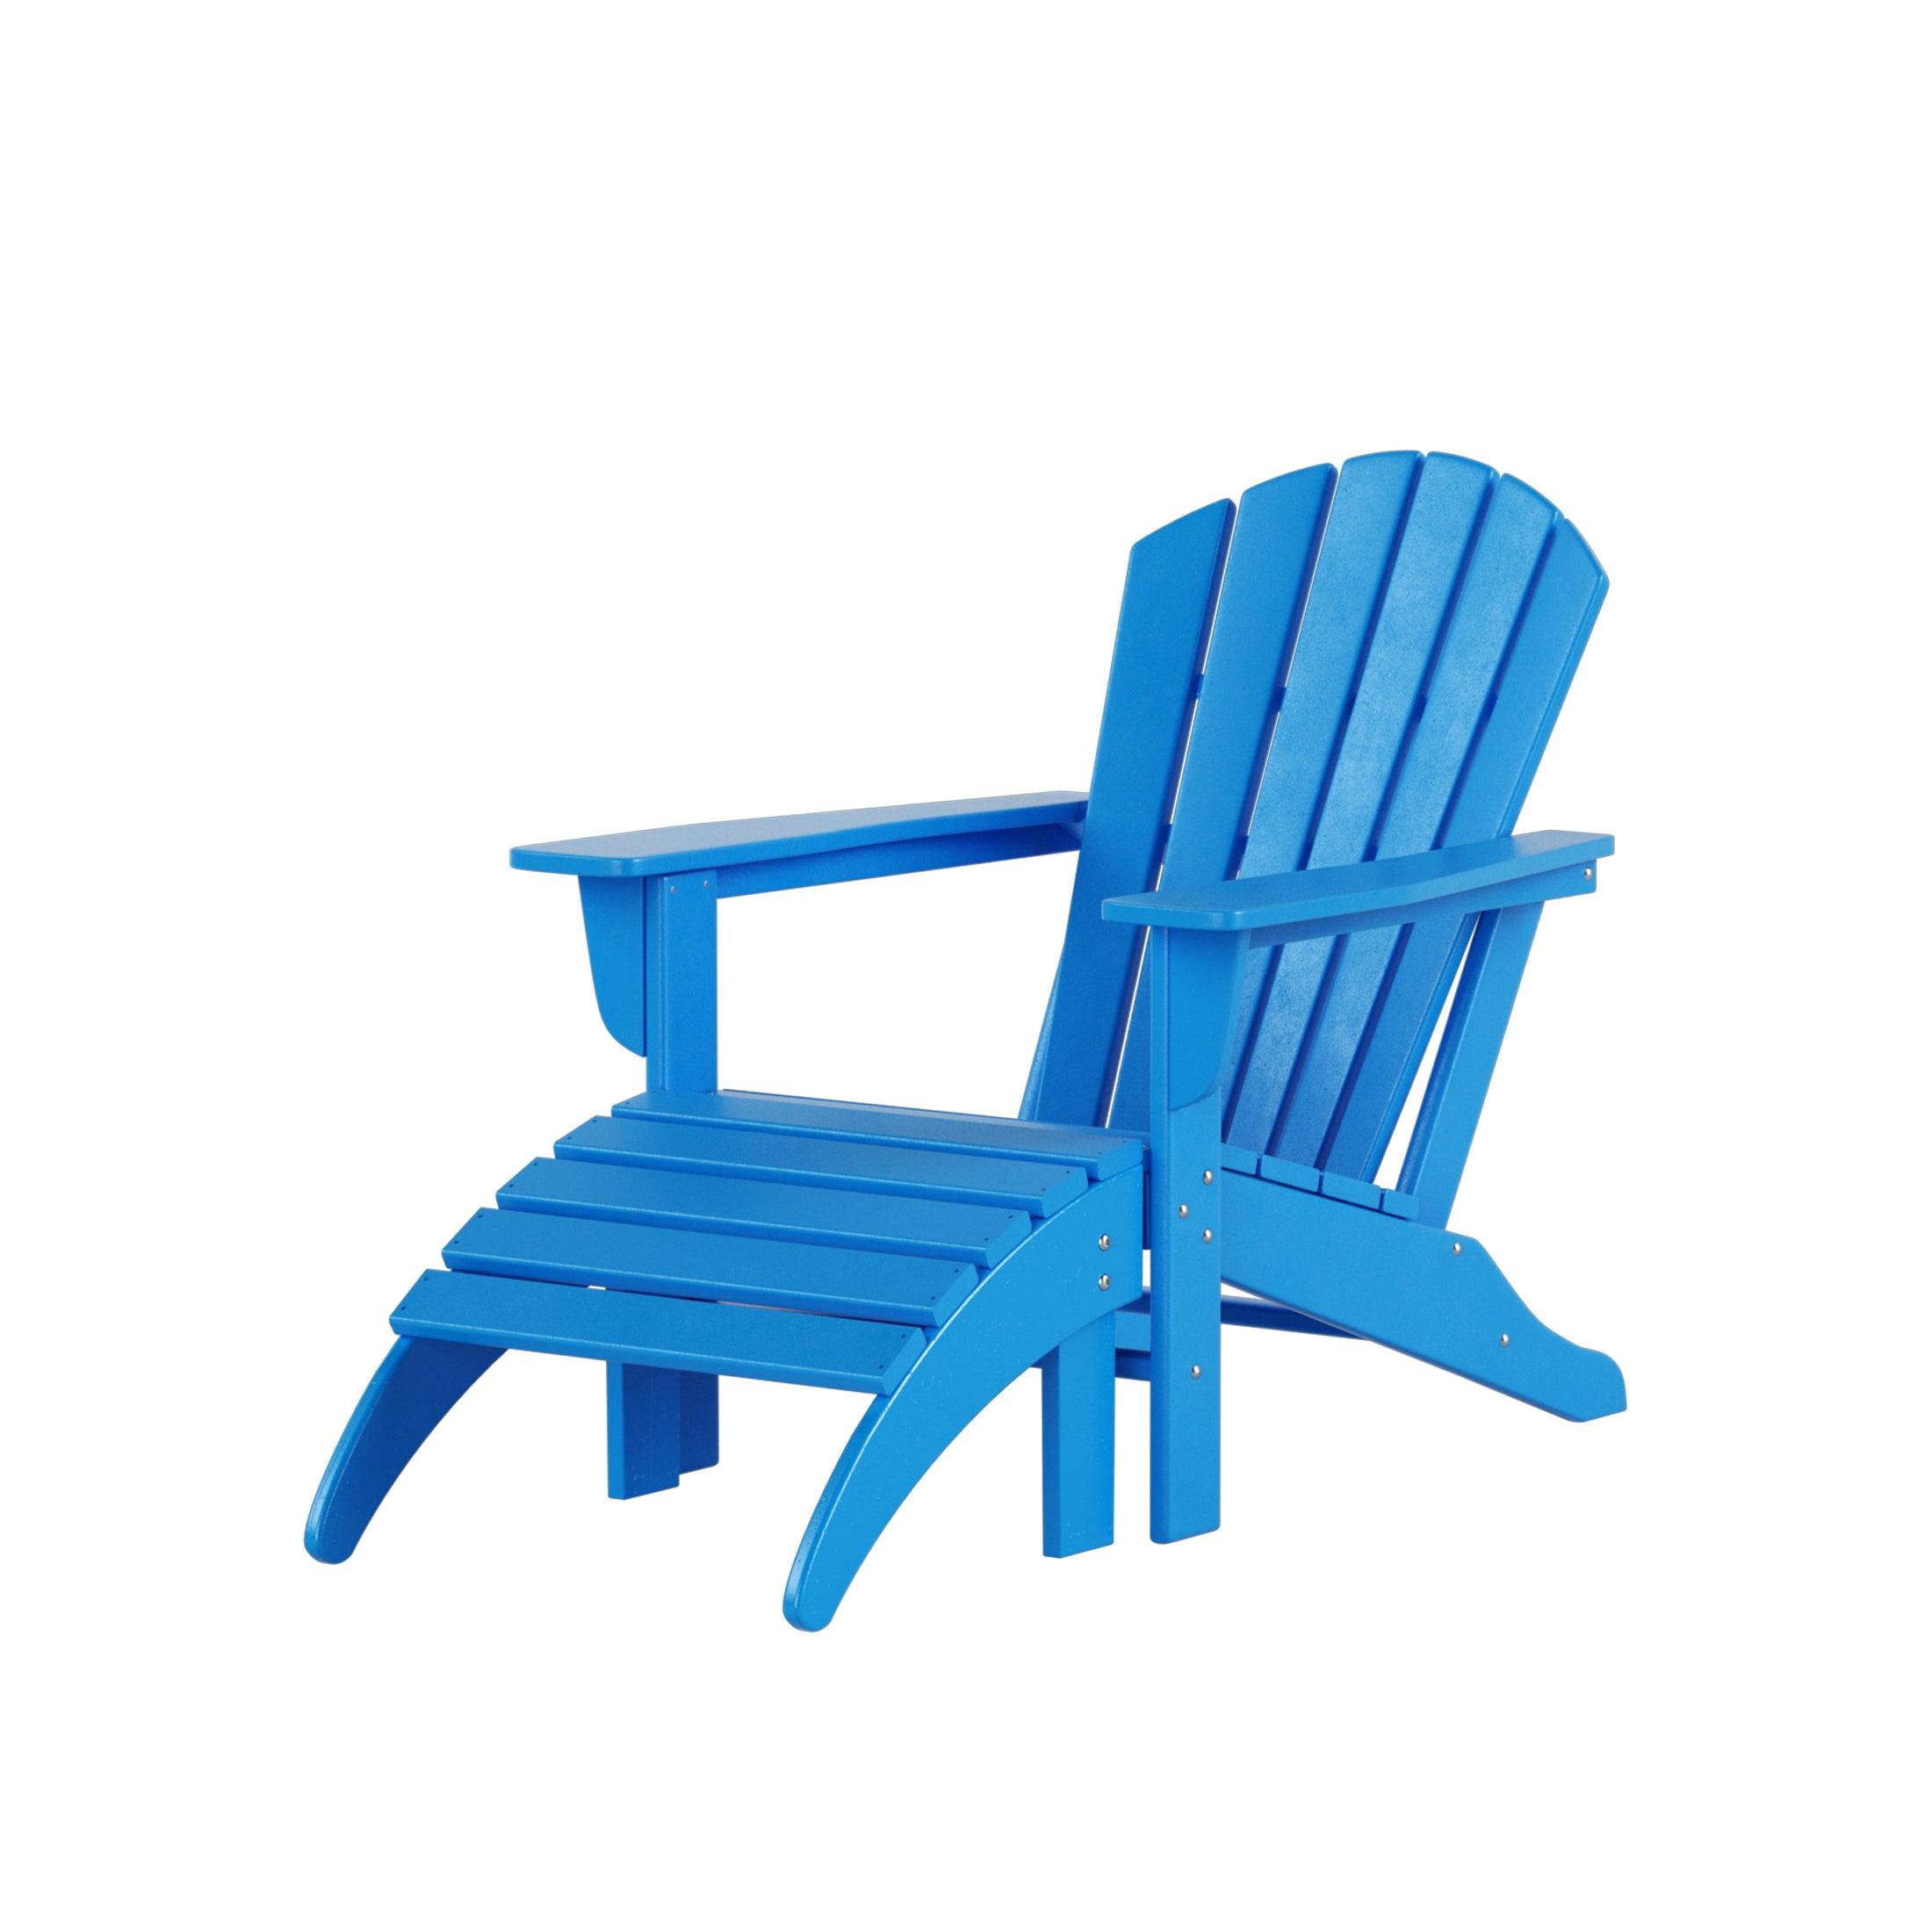 Costaelm Outdoor Adirondack Chair With Ottoman 2-Piece Set, Pacific Blue